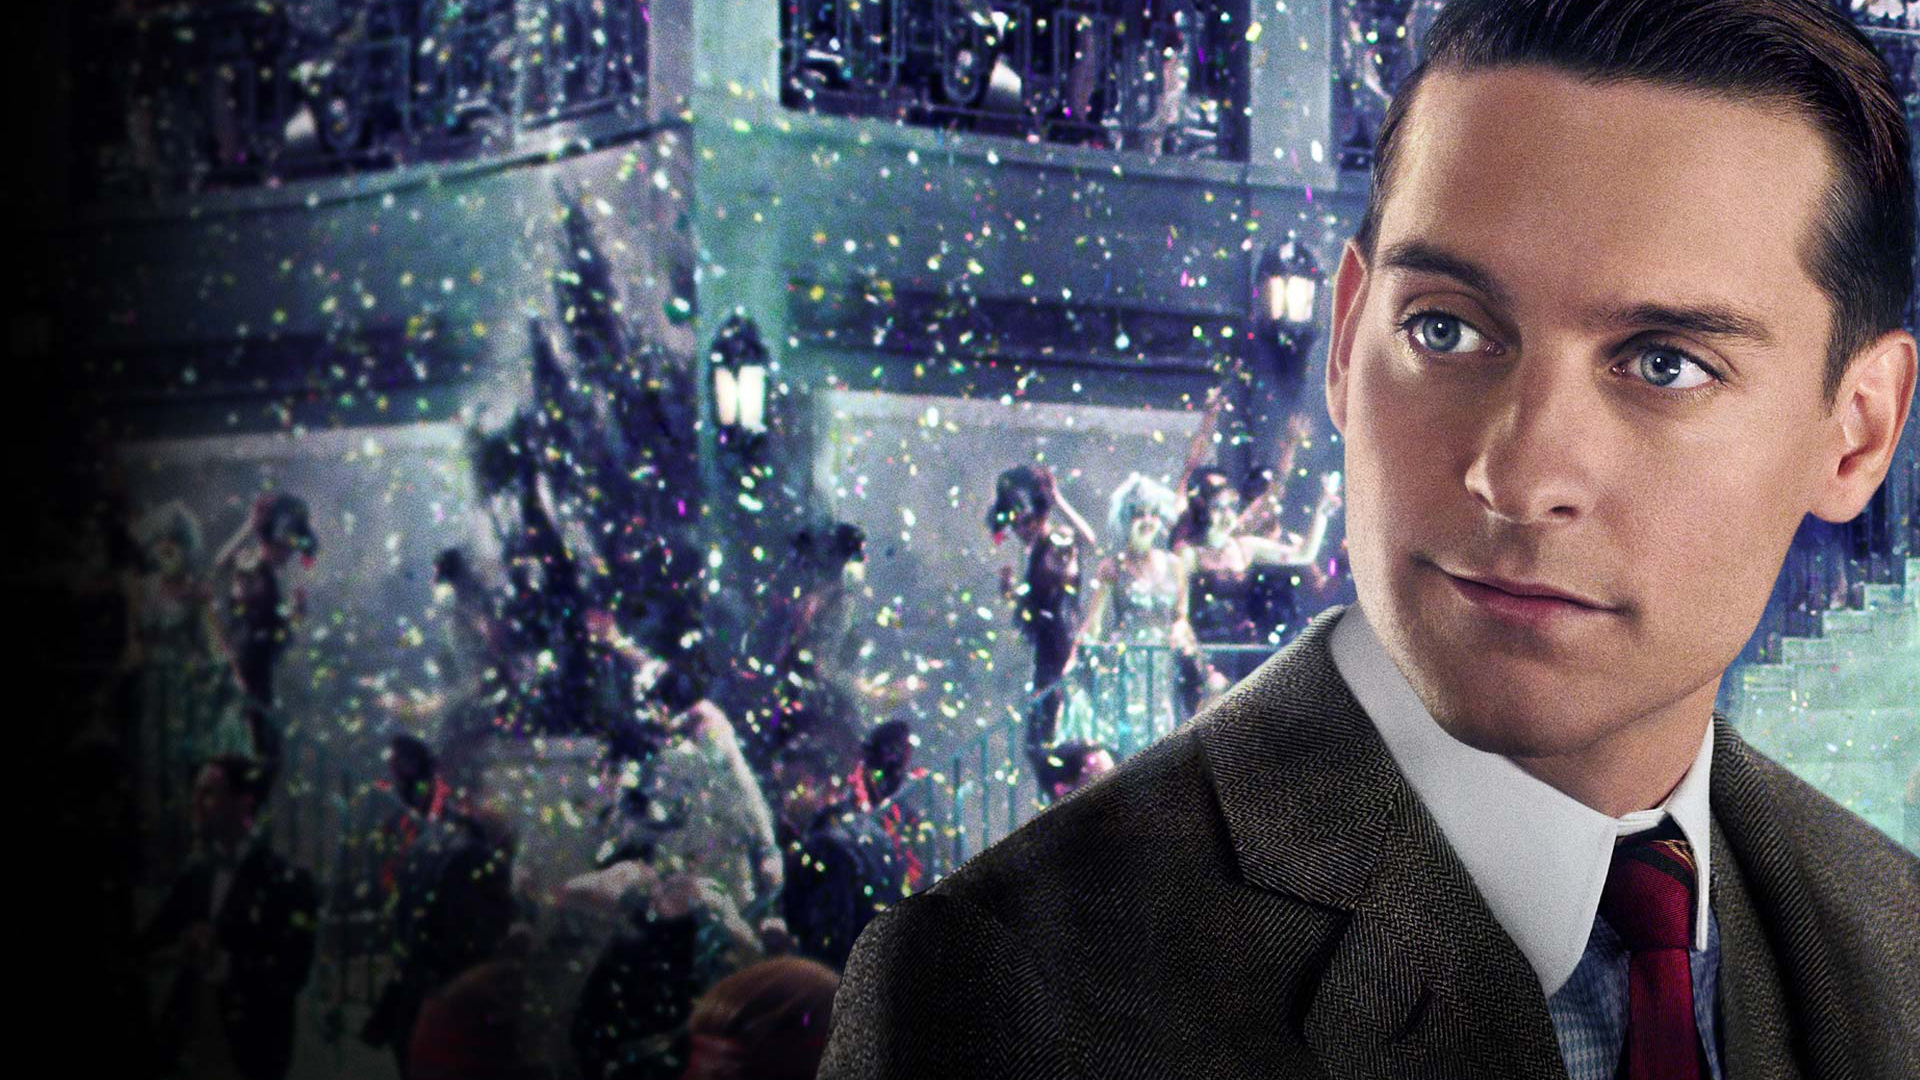 Movie The Great Gatsby HD Wallpaper | Background Image